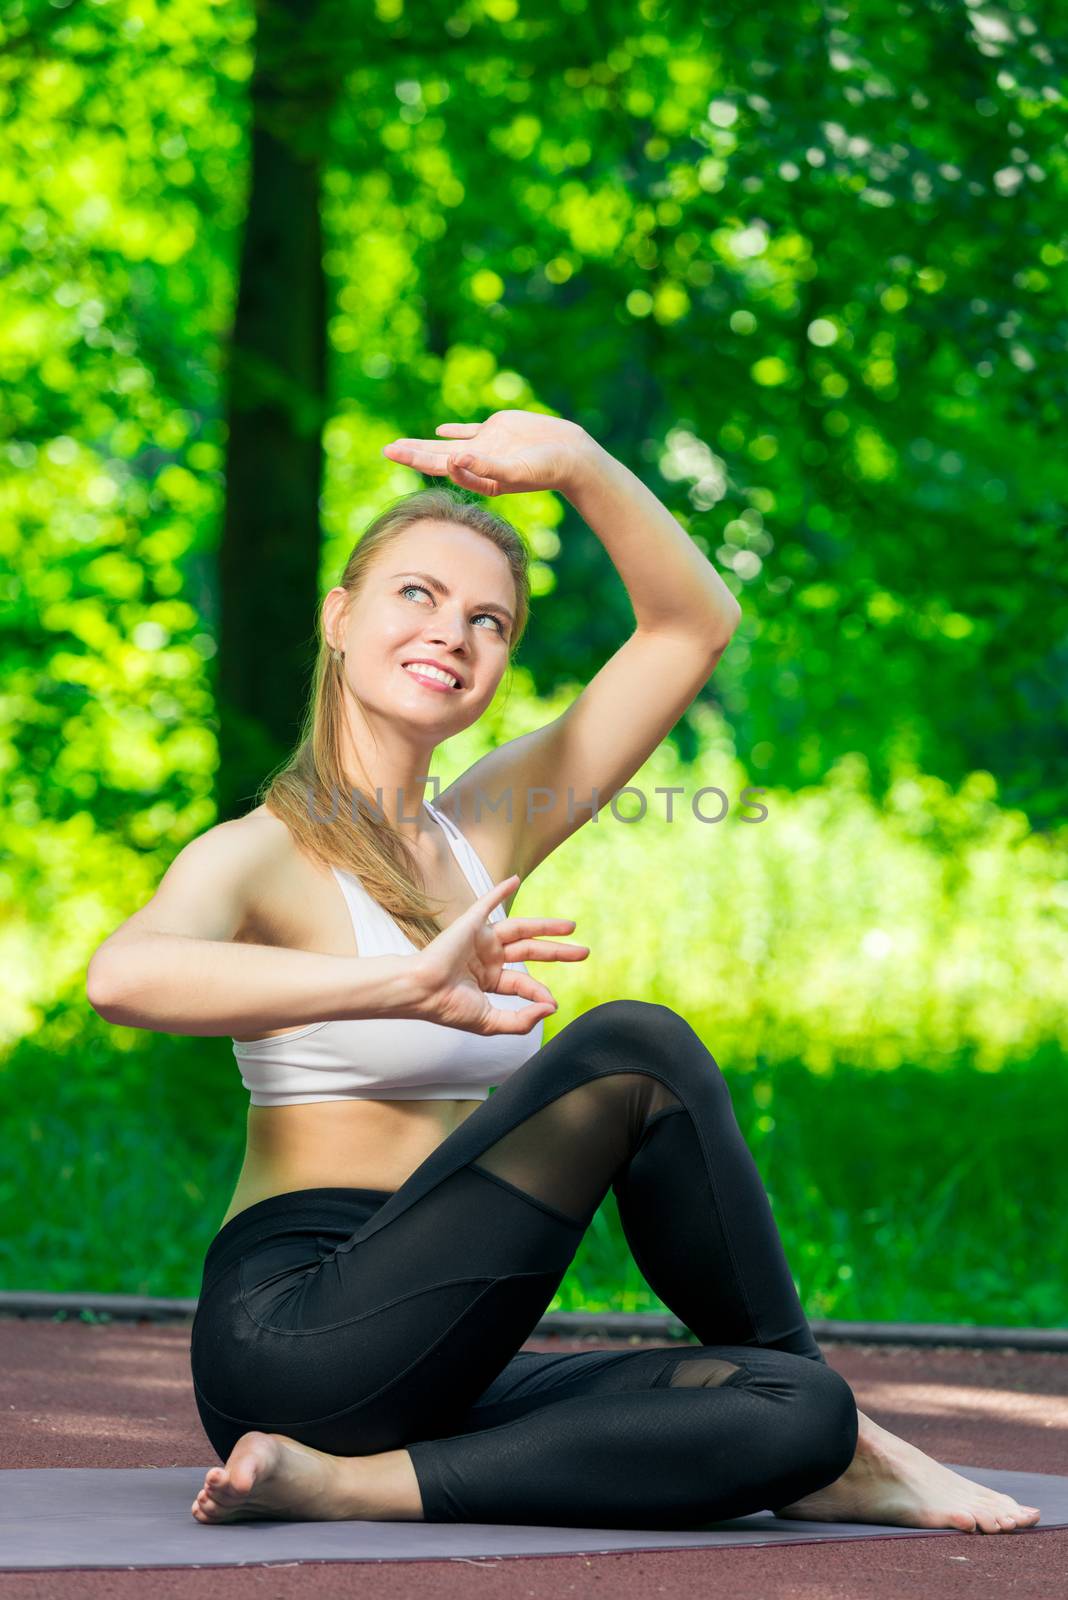 yoga asanas - pilates and yoga trainer performs exercises in the park